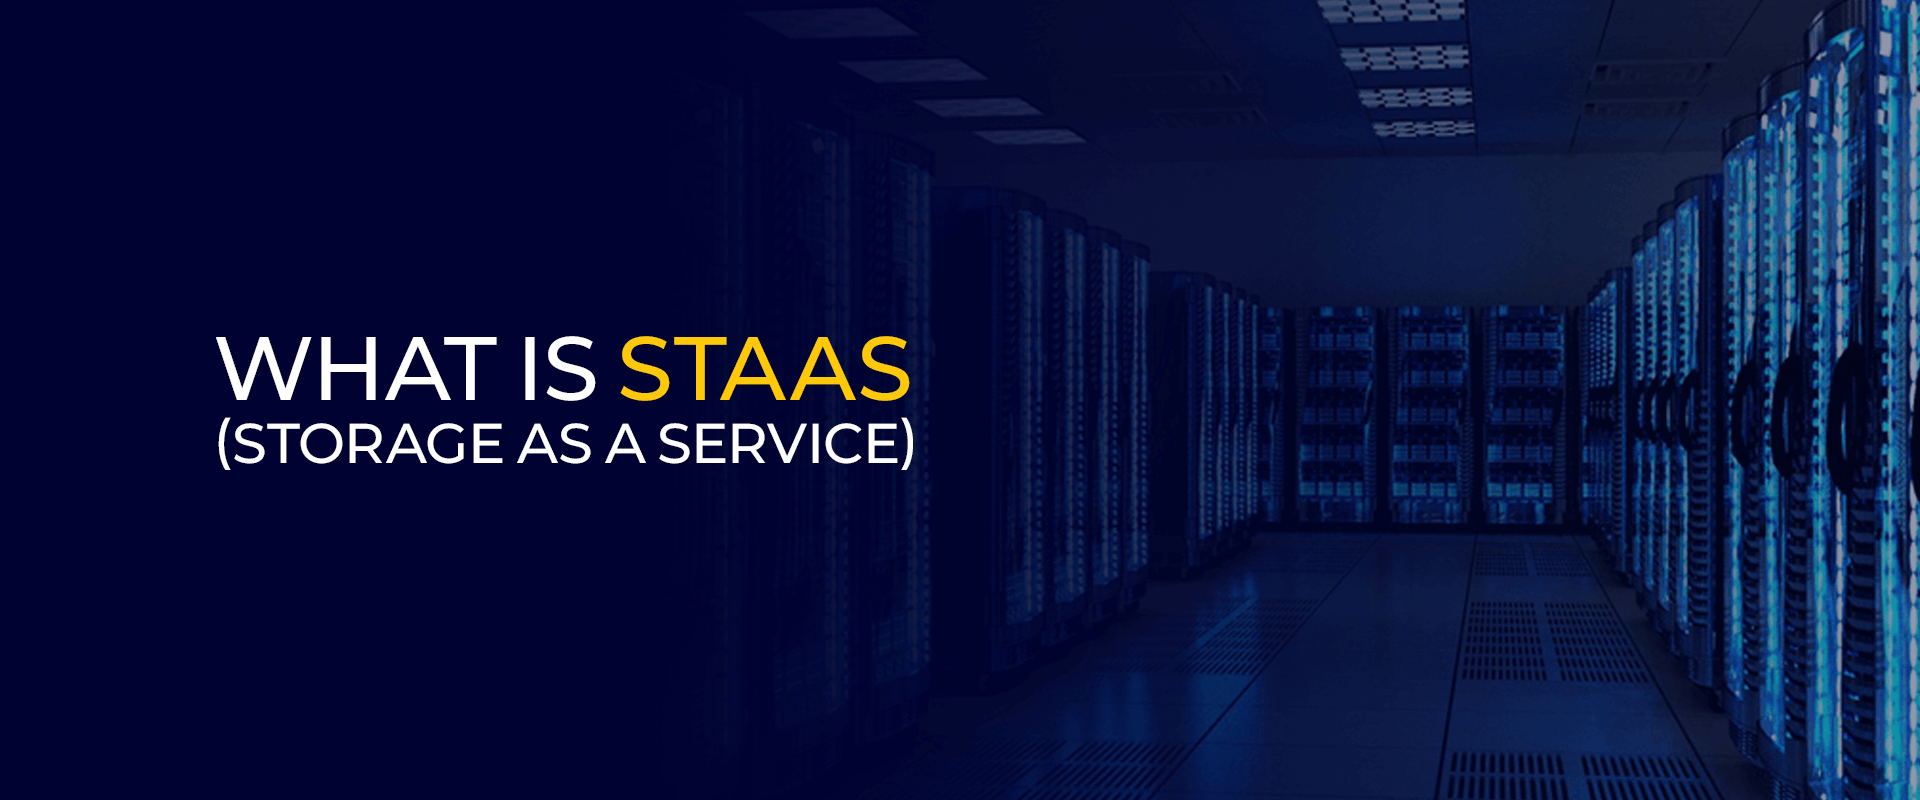 Was ist STaaS (Storage as a Service)?